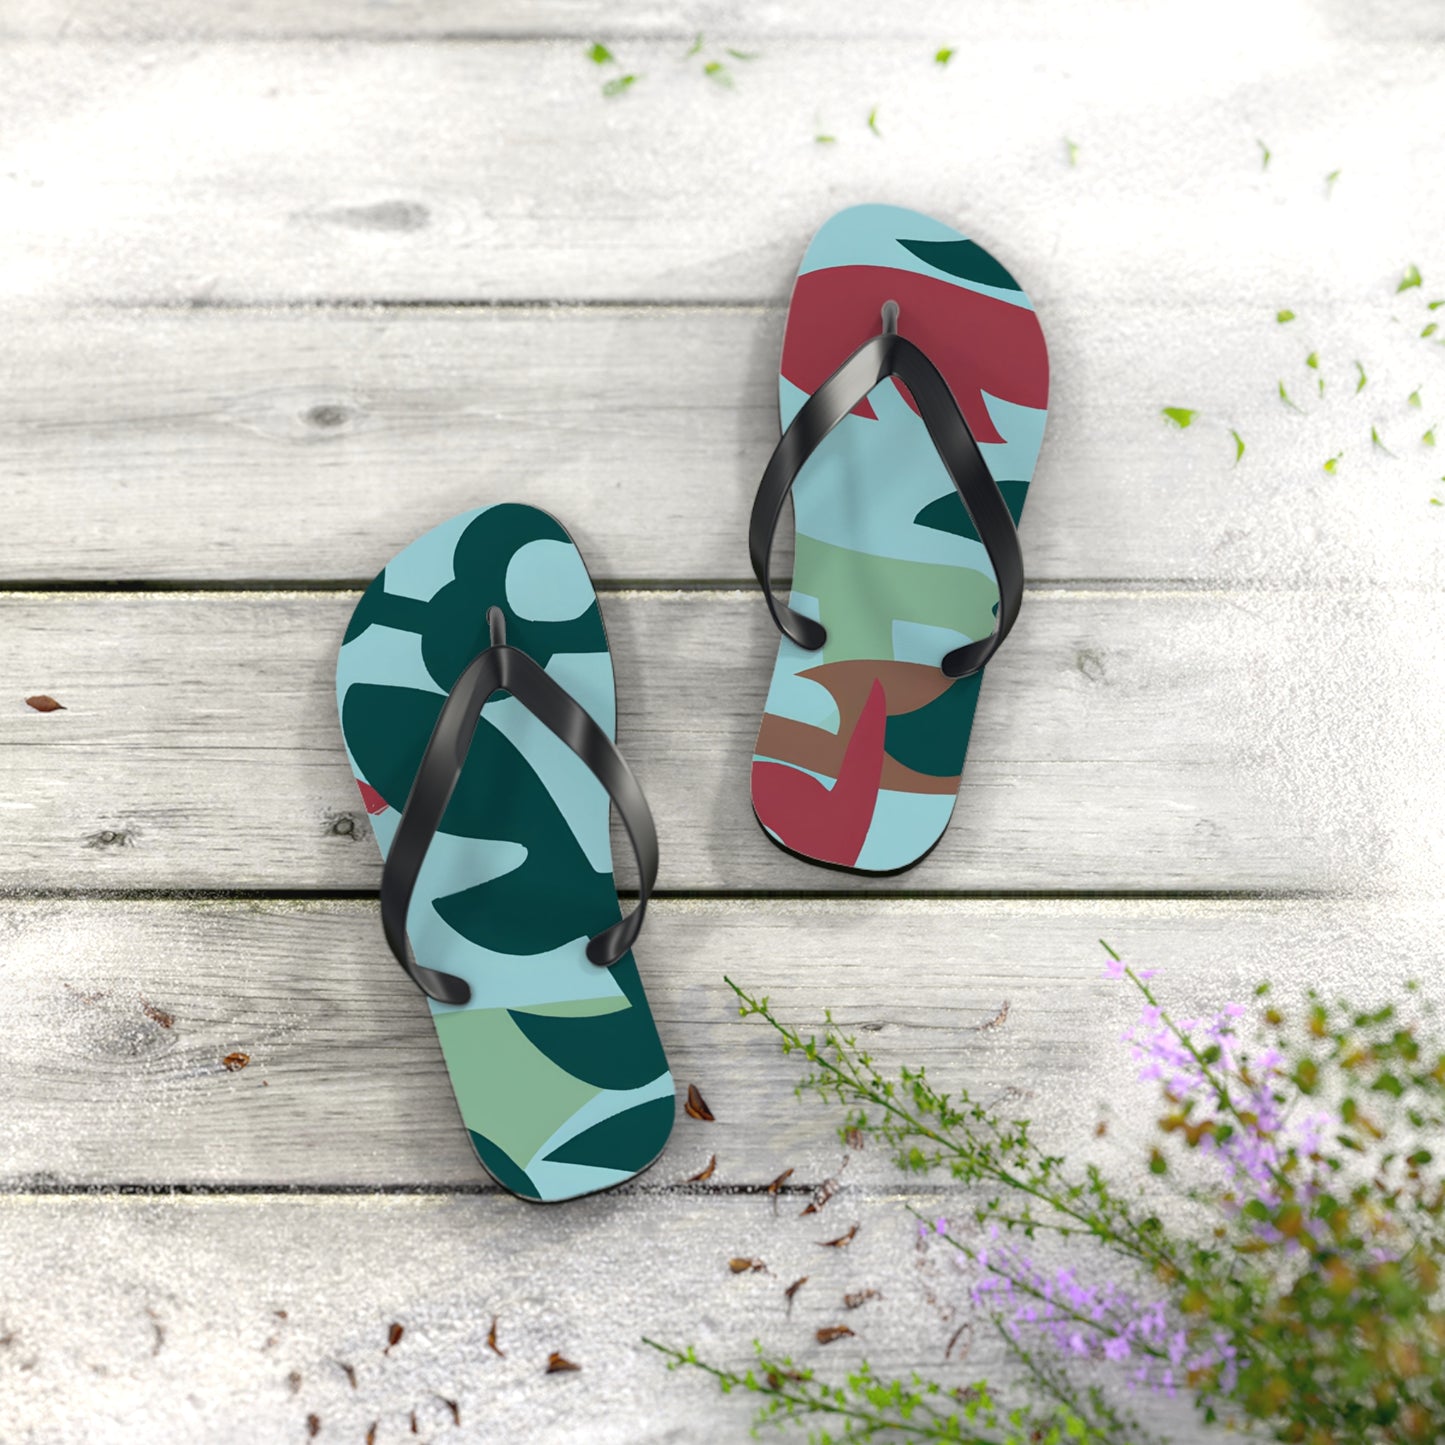 Chaparral Ione - All-Day Flip-Flops